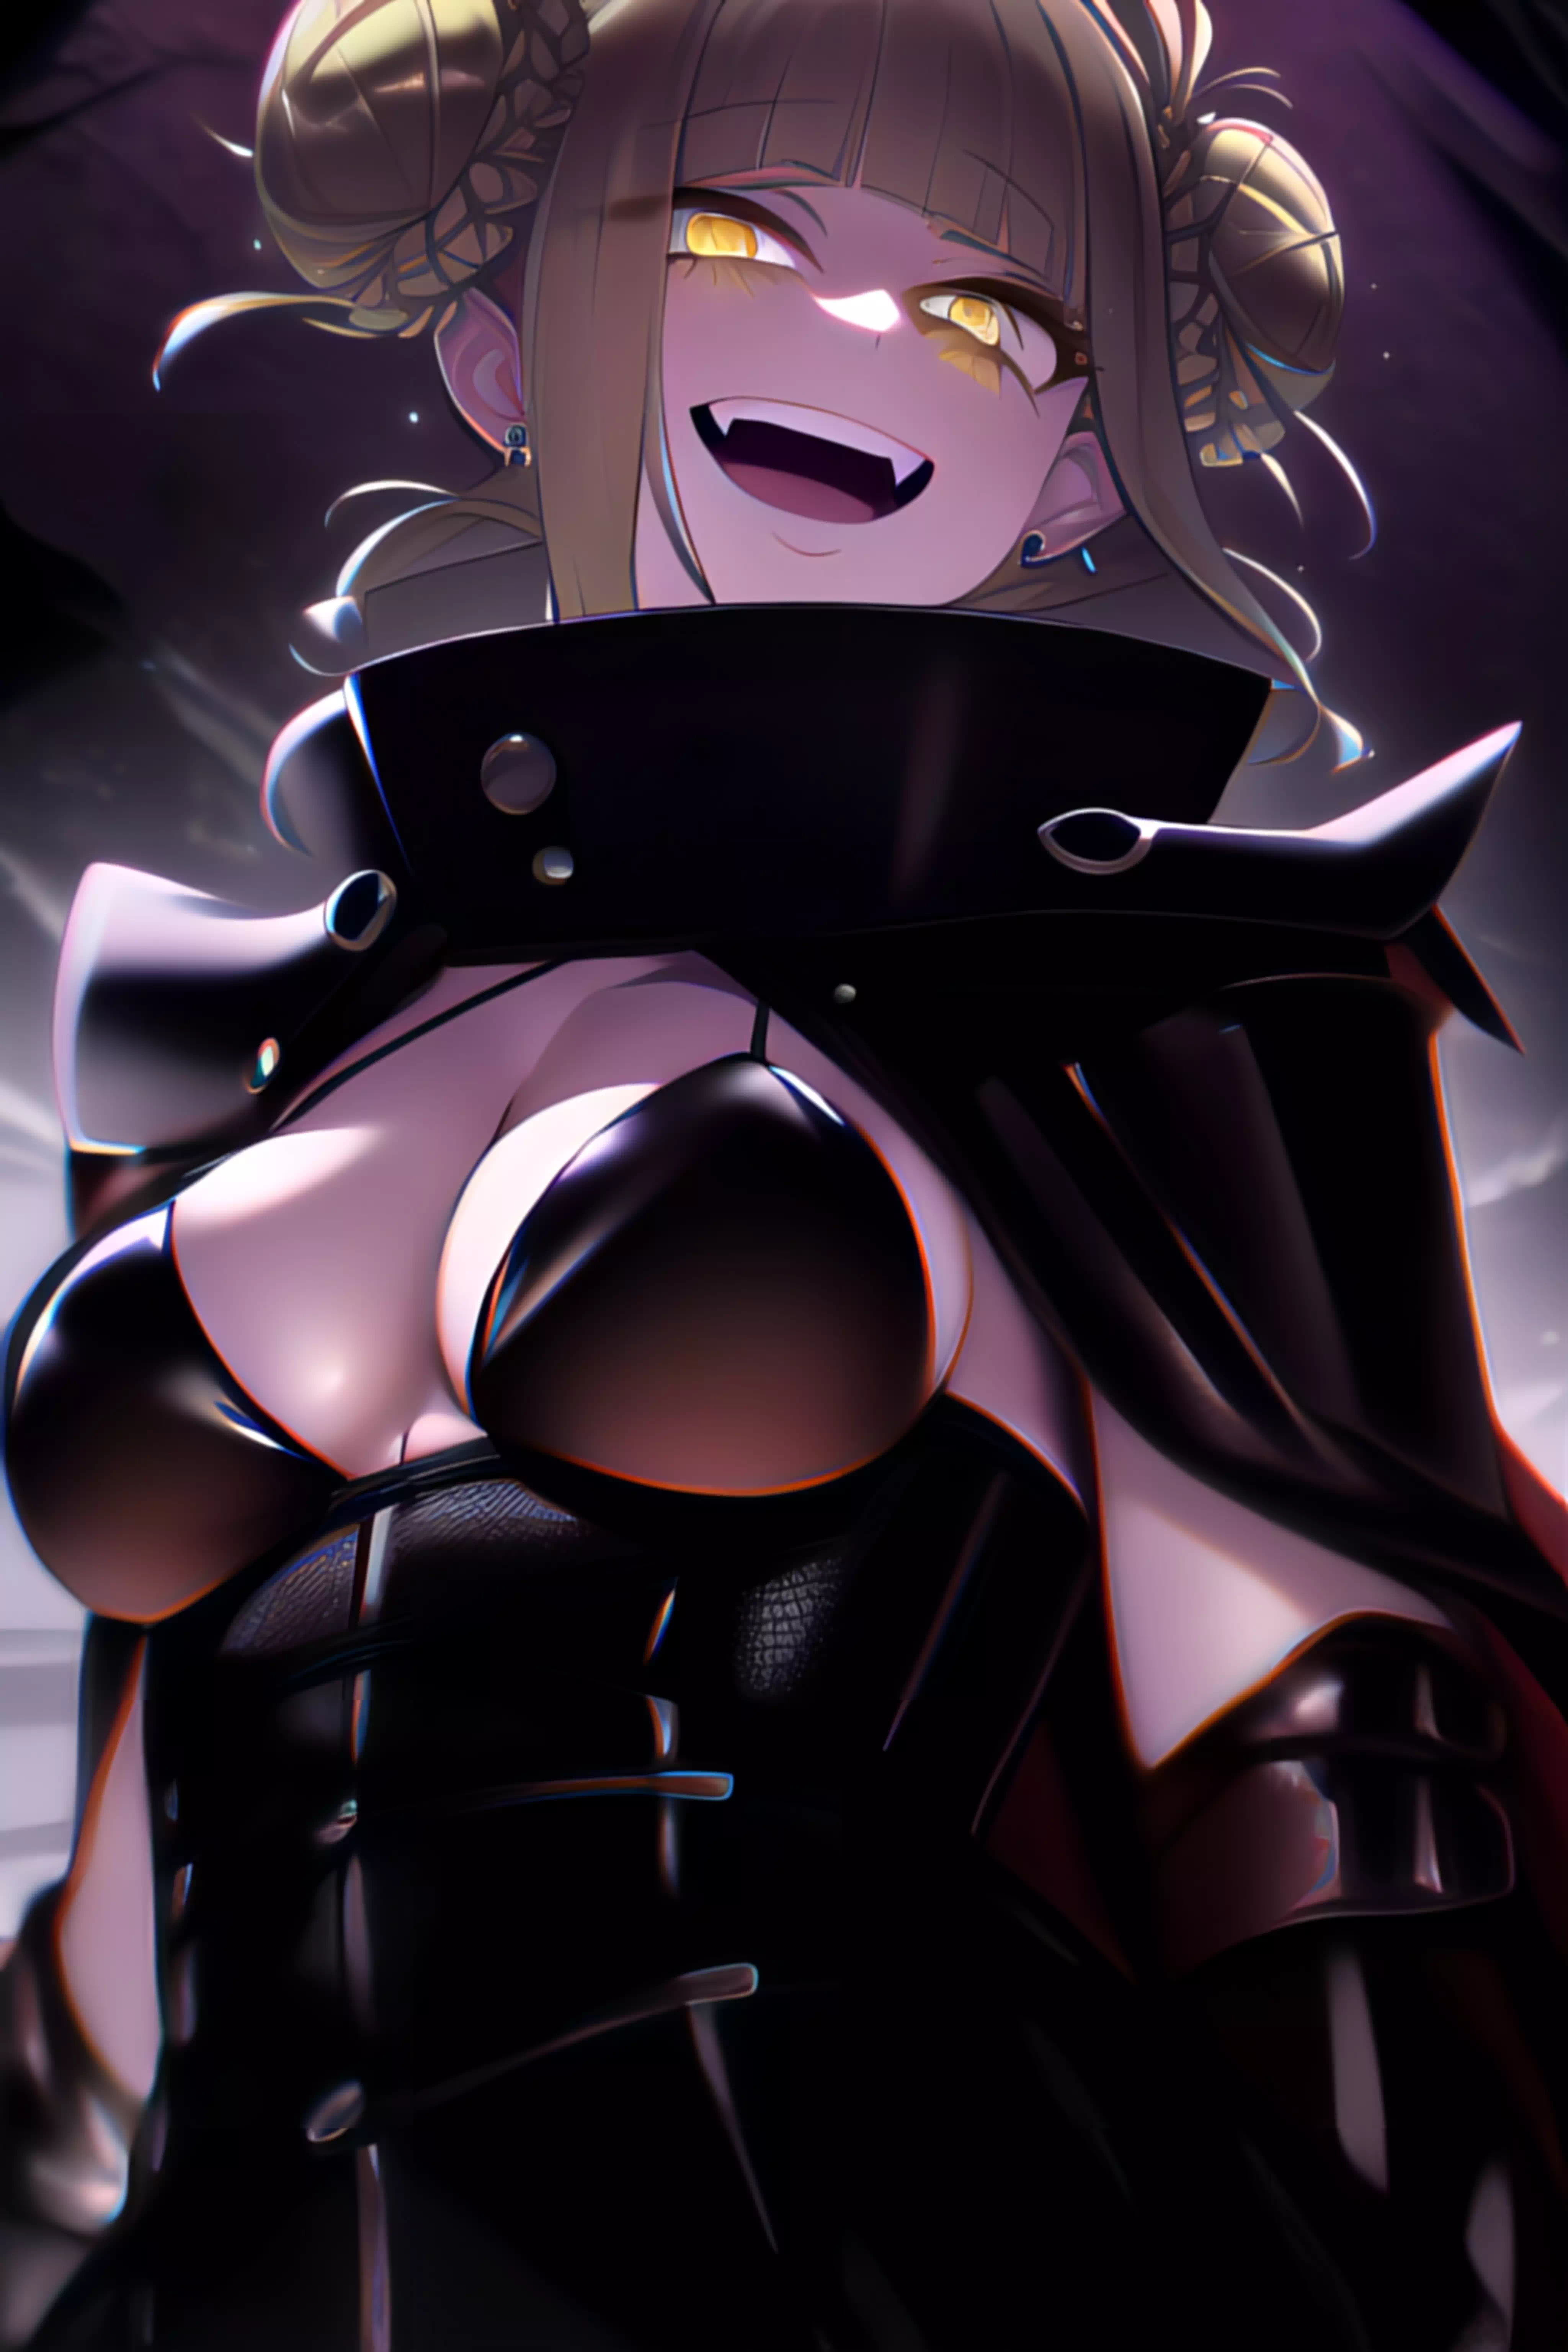 Himiko Toga x PSO2NGS